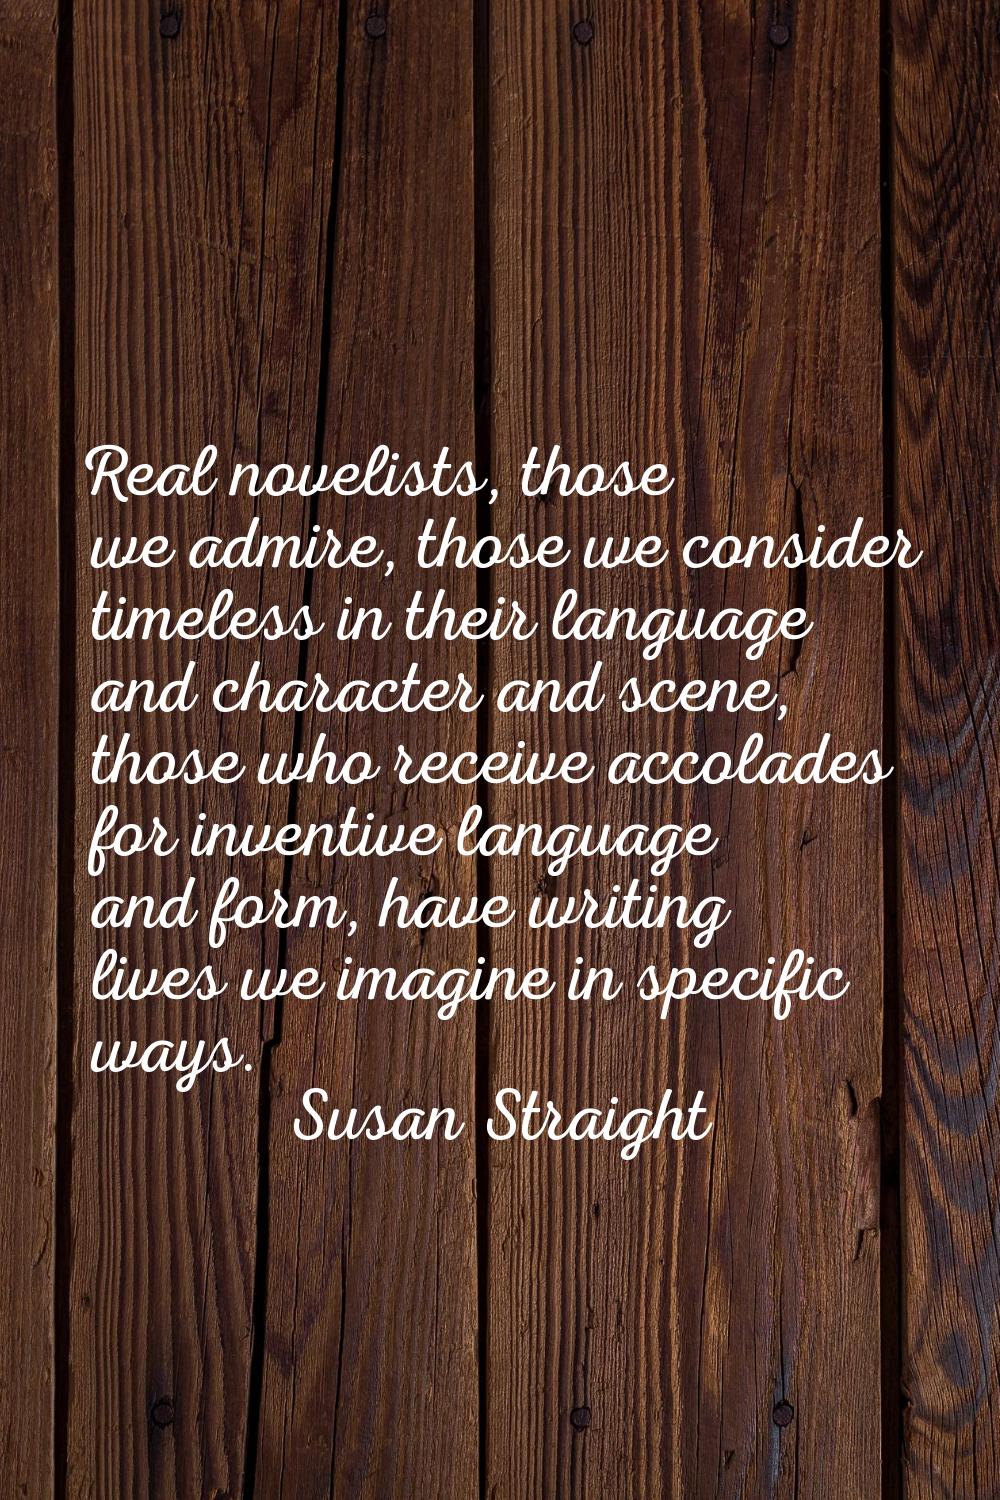 Real novelists, those we admire, those we consider timeless in their language and character and sce